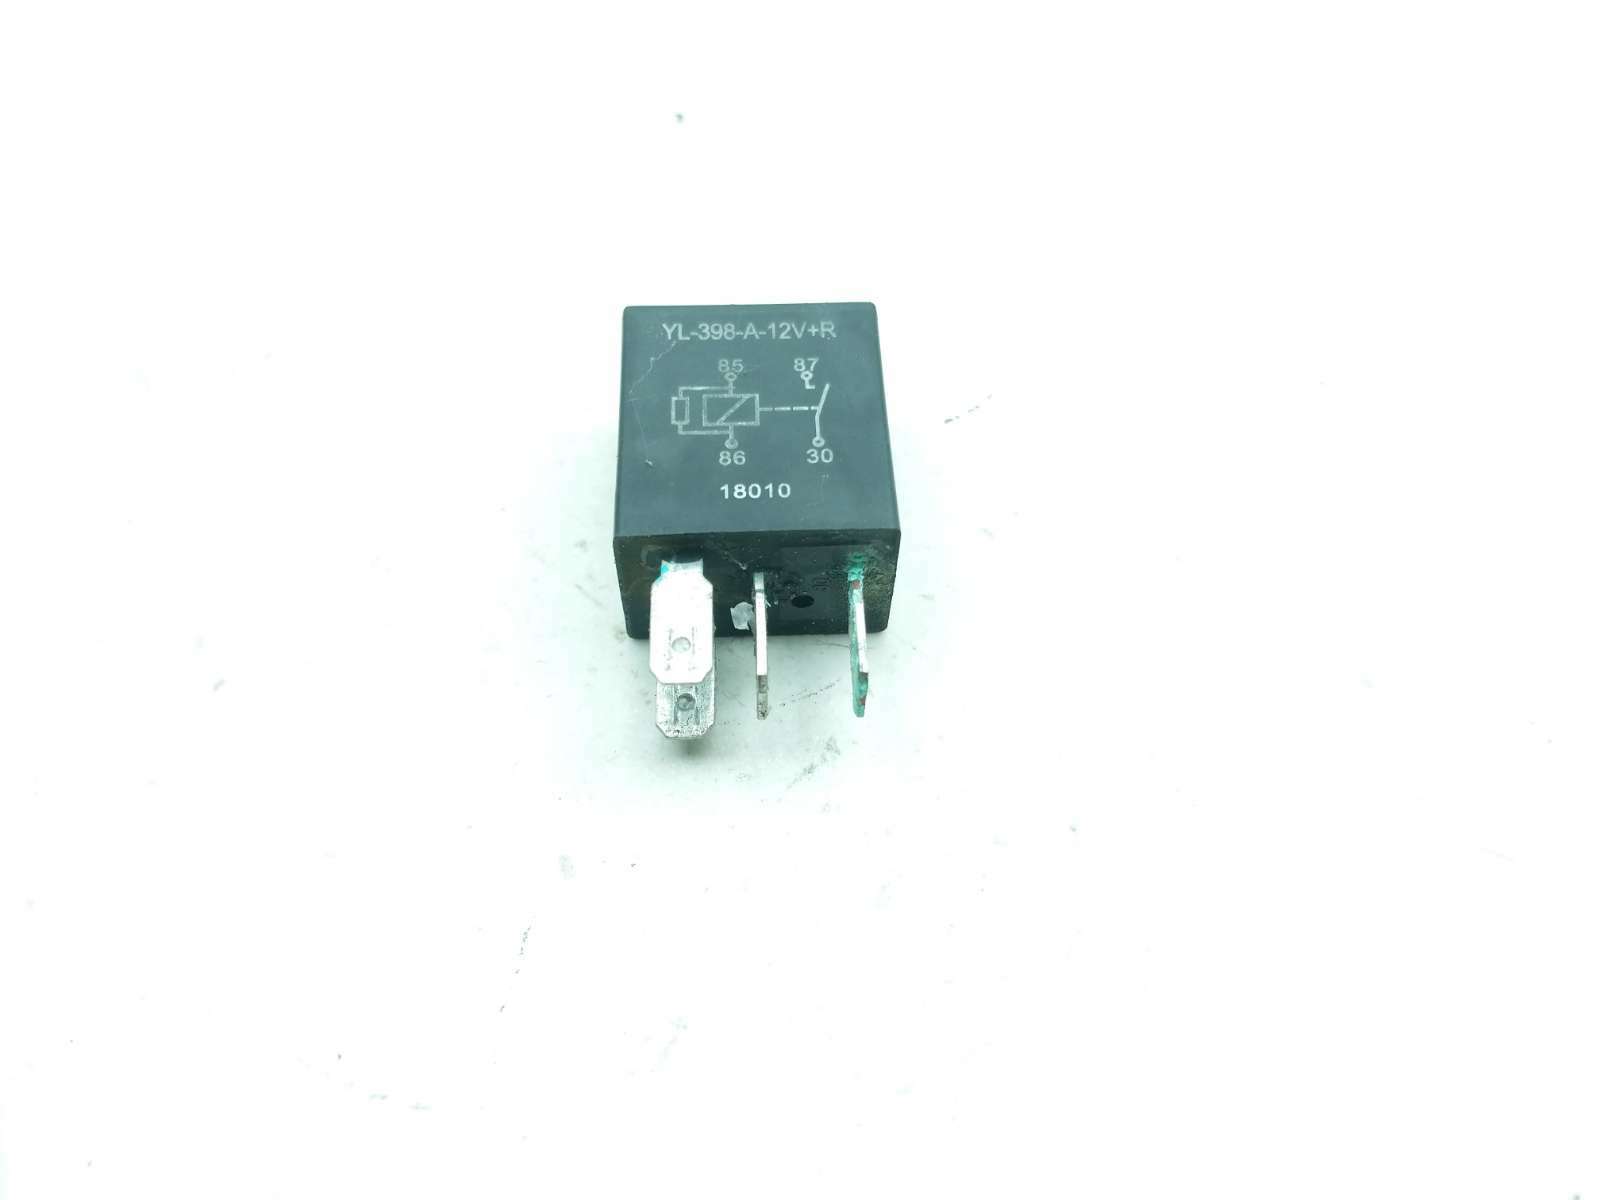 02 Harley Ultra Classic Electra Glide FLHTCUI Relay YL-398-A